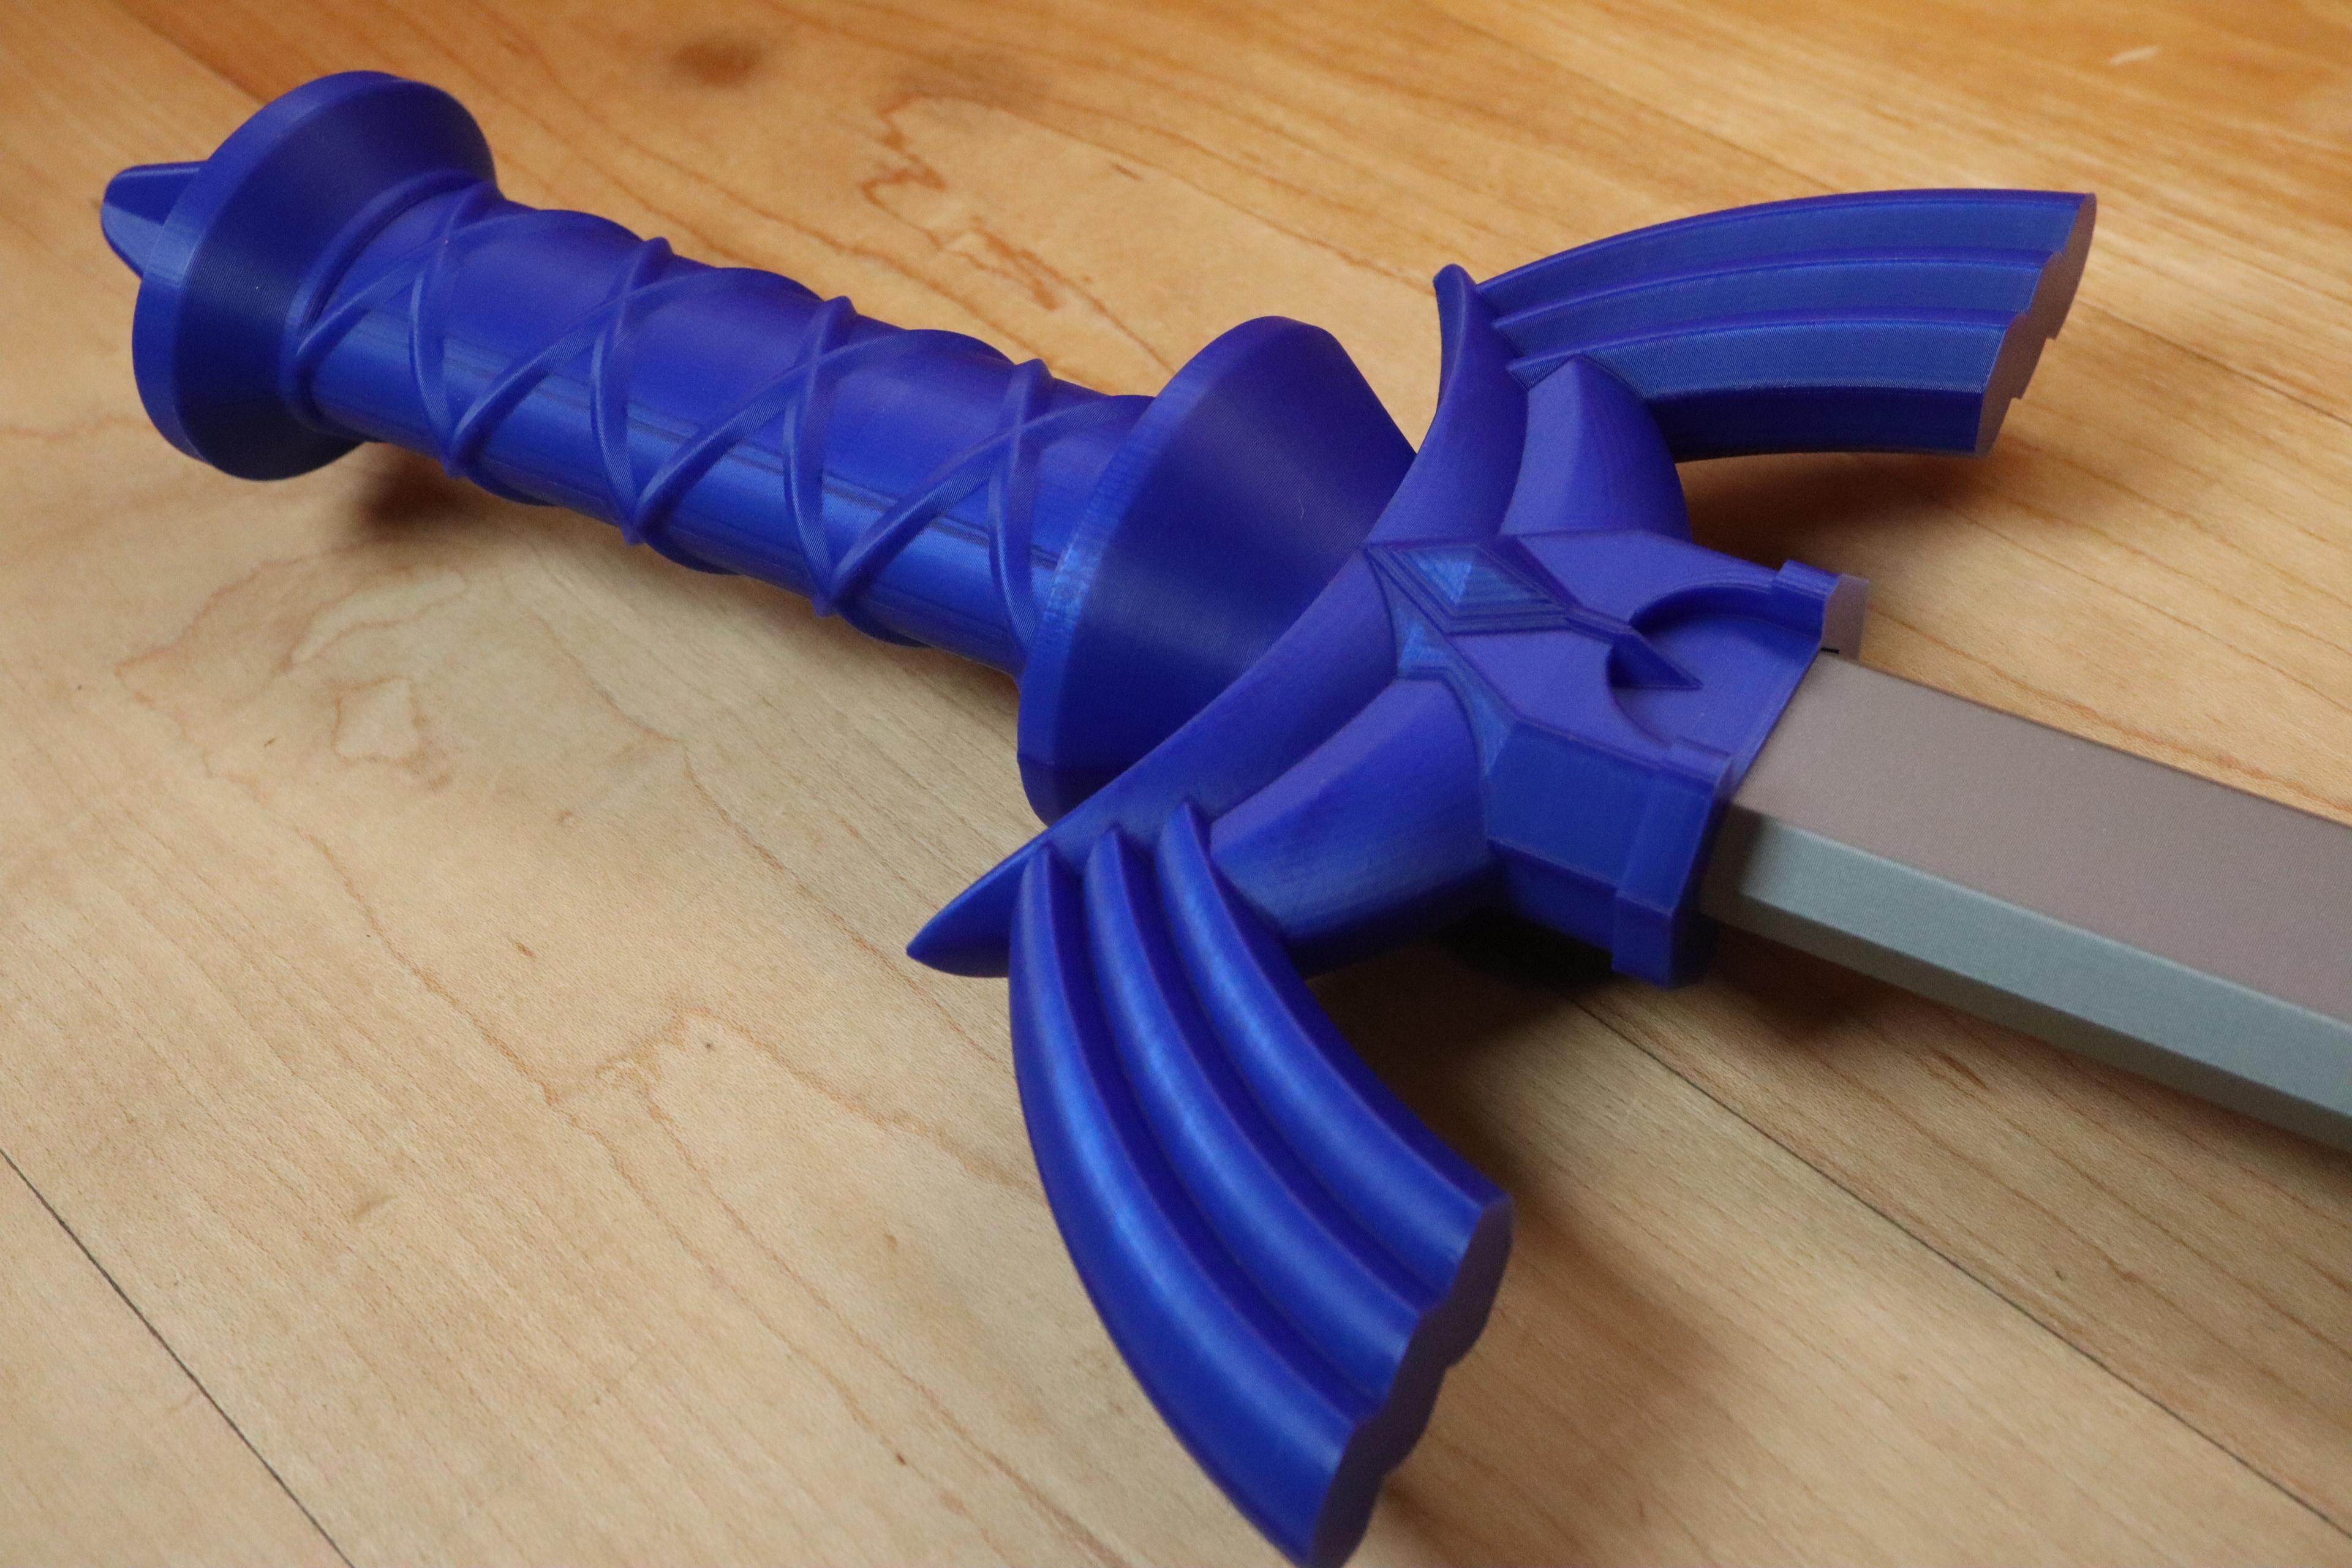 Collapsing Master Sword with Replaceable Blade - 3D model by